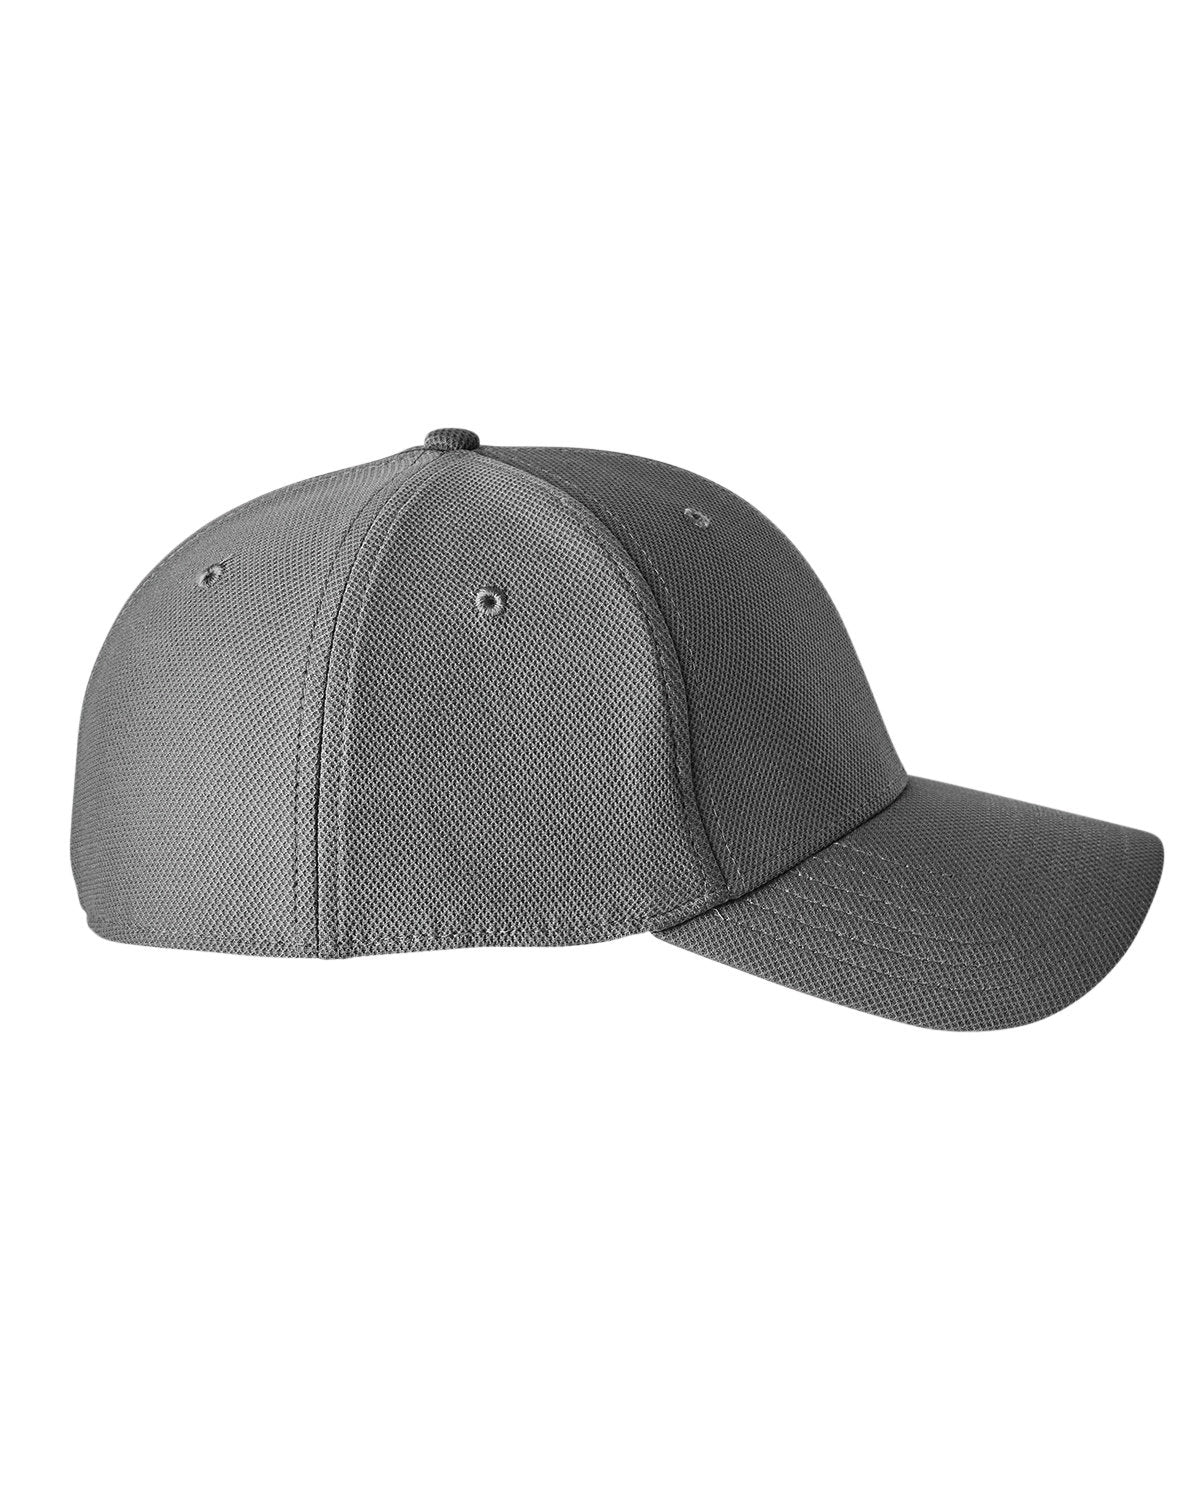 Under Armour Unisex Blitzing Curved Customized Caps, Graphite